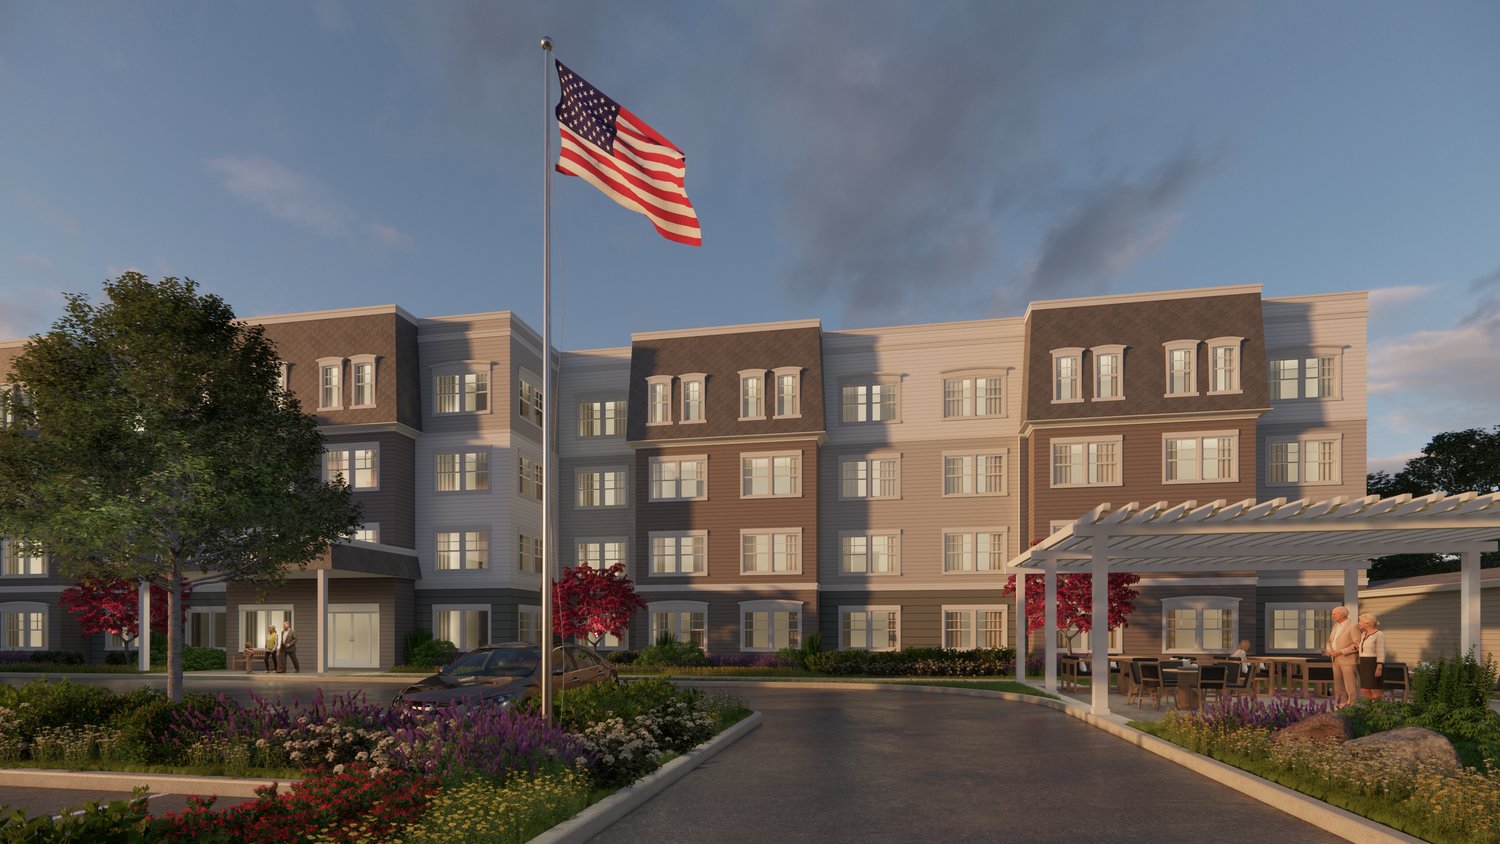 A rendering of a modernized Dogwood Terrace  senior center, which officials hope to get started on later this year. The Town of Hempstead Housing Authority said new features would include more elevators and parking spots, and larger units.